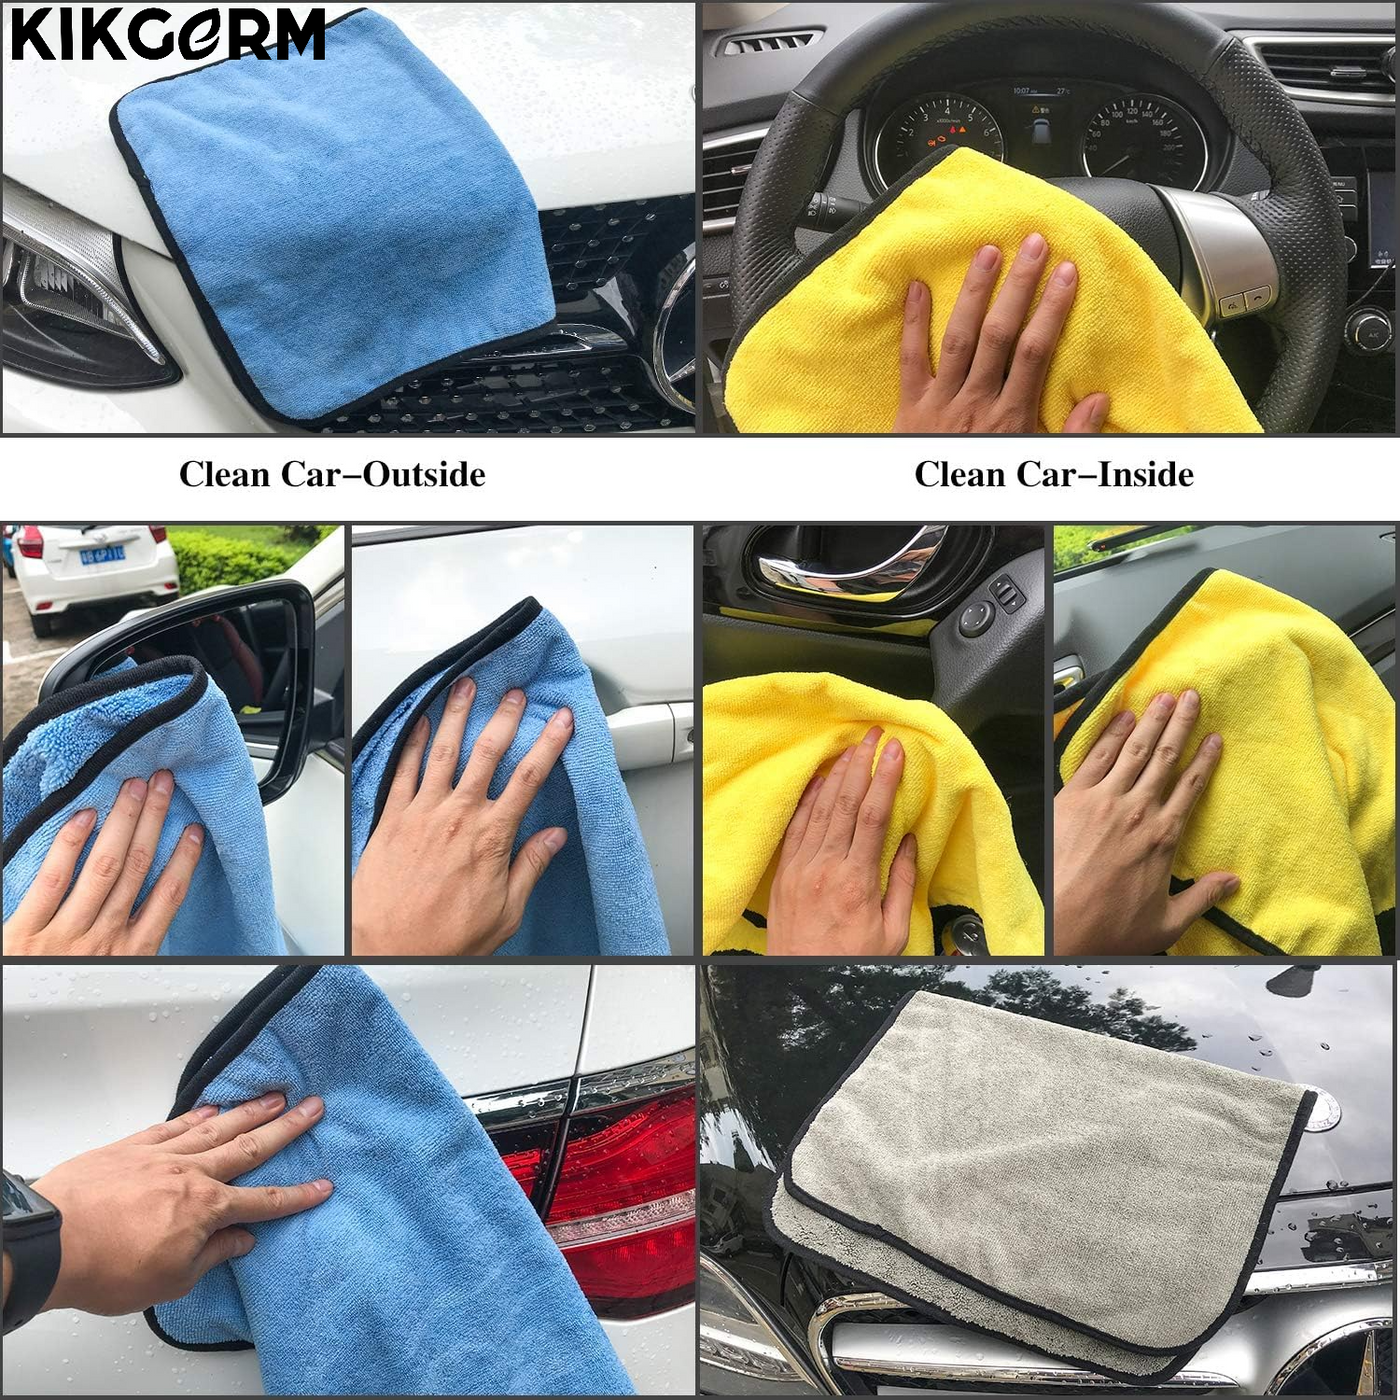 Heavy Microfiber Cloth for Car Cleaning Multi Purpose | Pack of 3